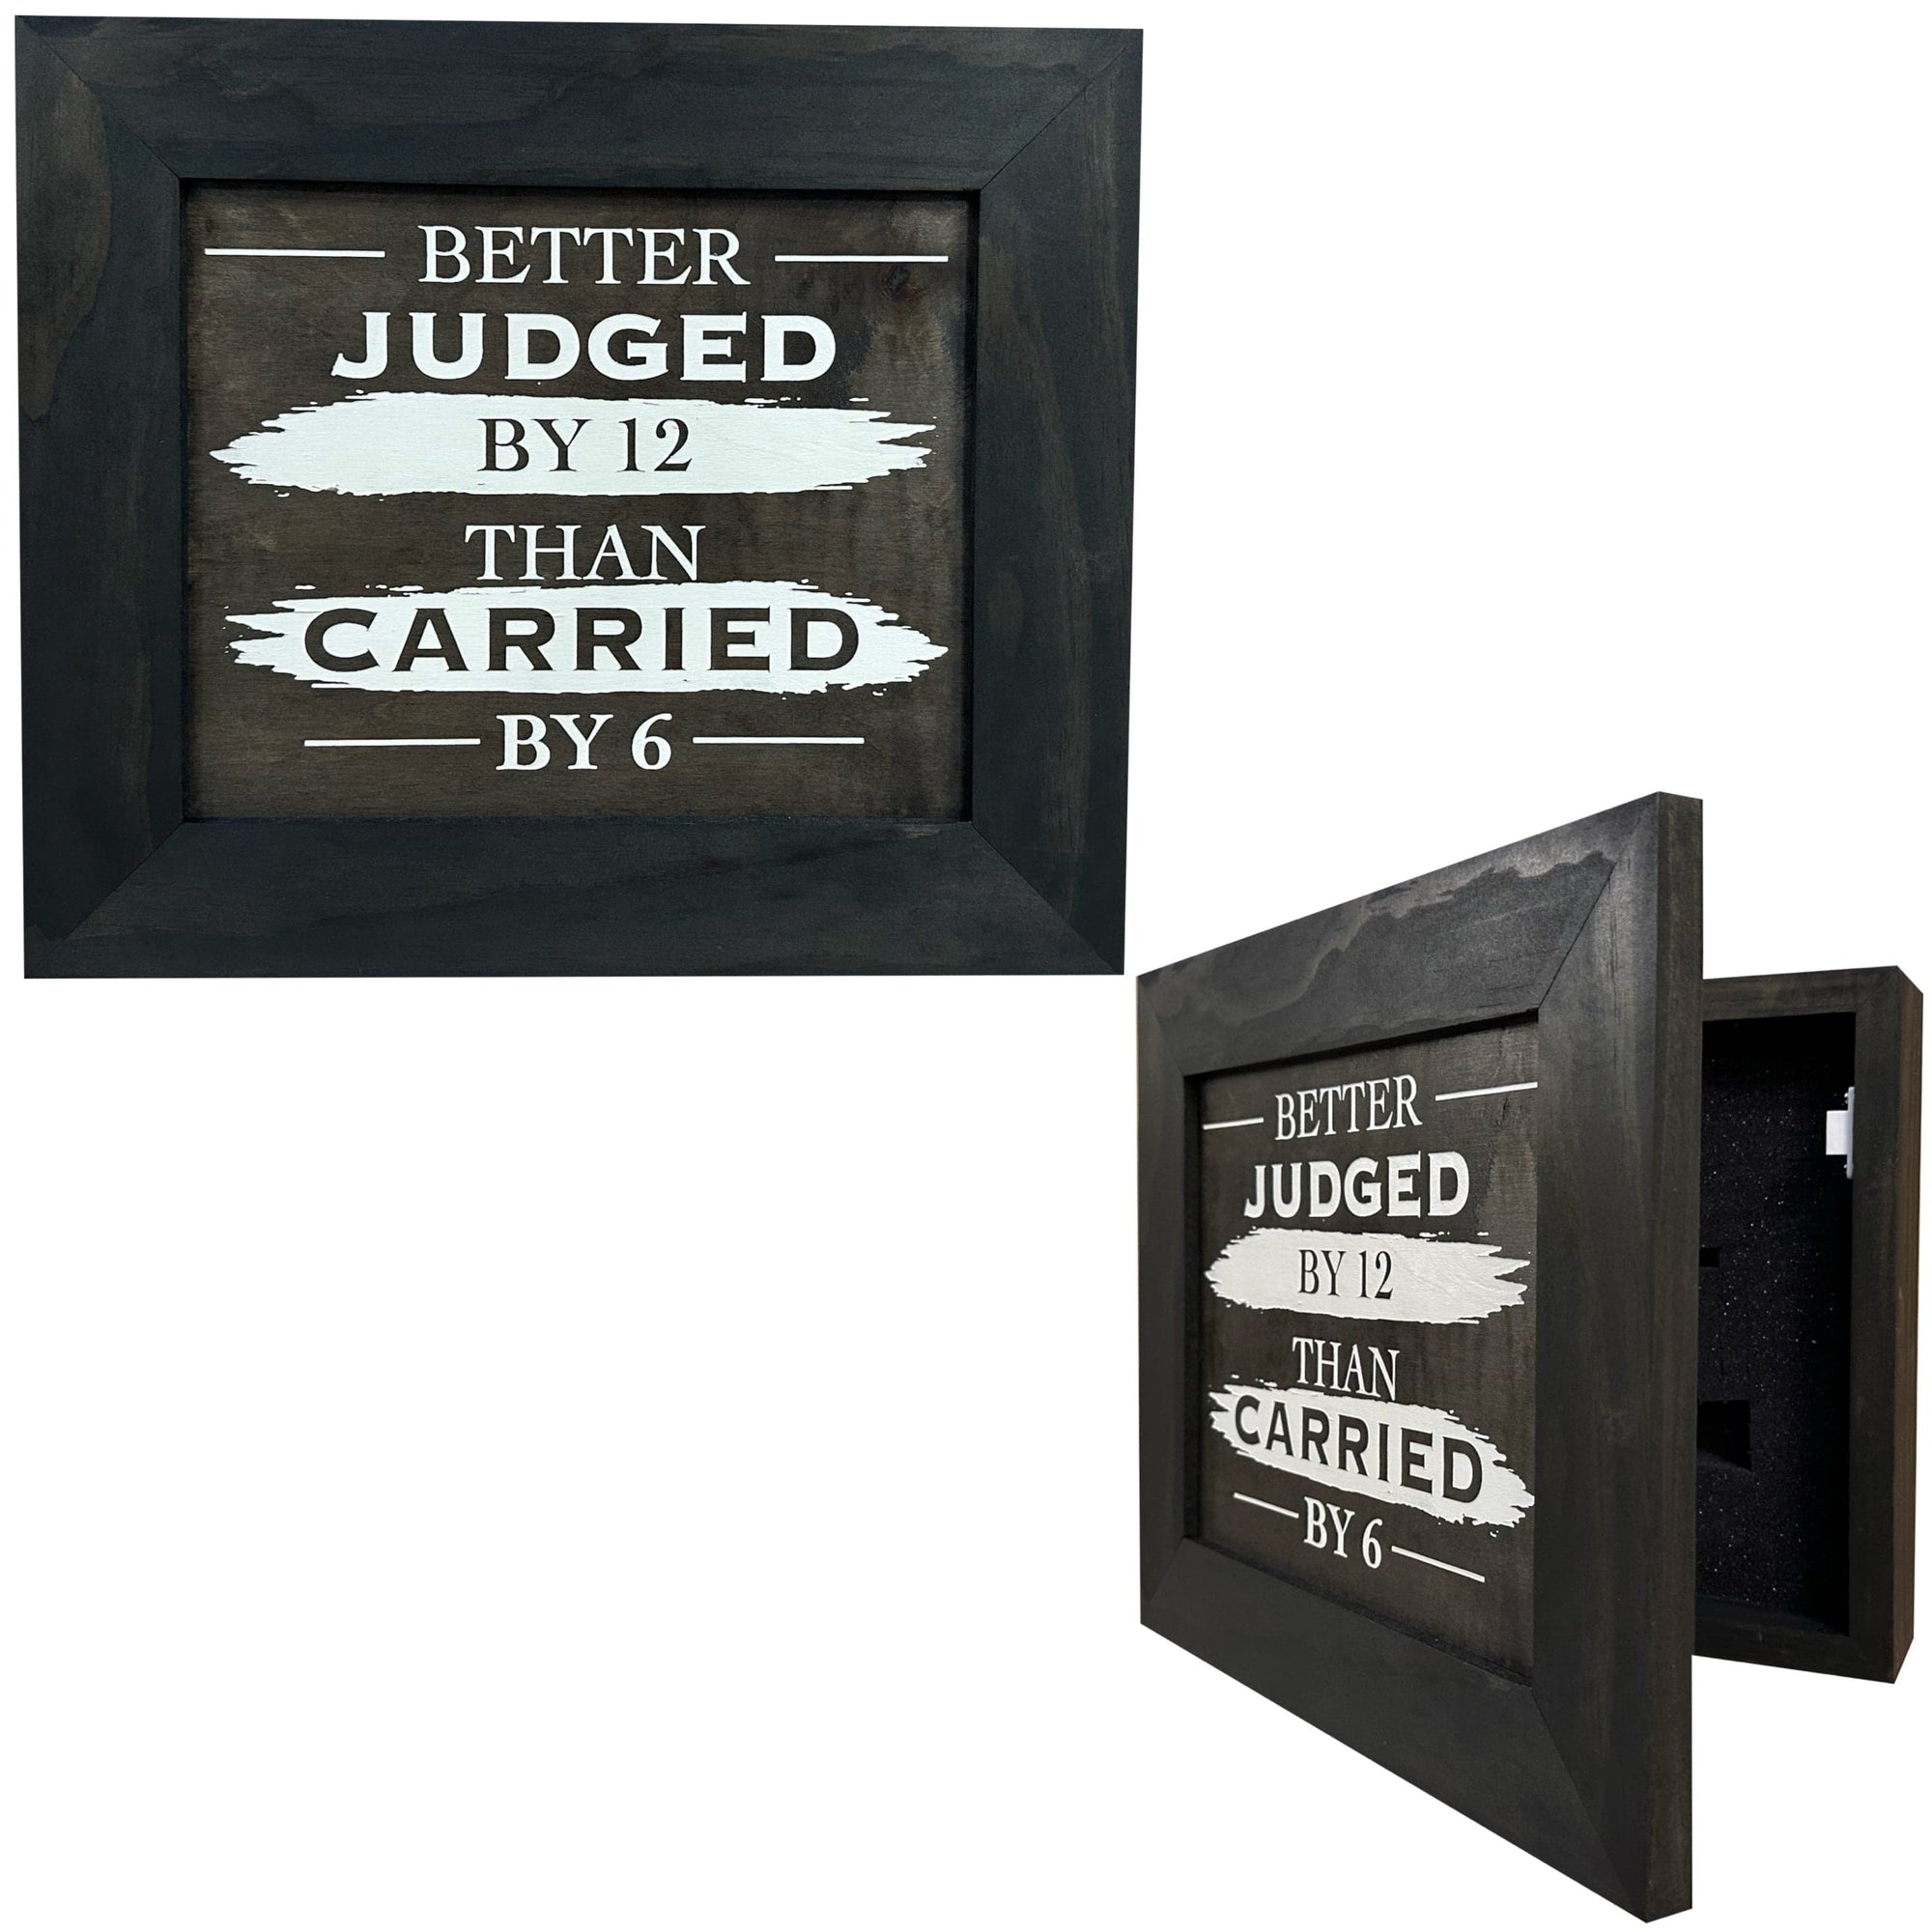 Judged by 12 Hidden Gun Cabinet - Recessed In Wall or Mount On The Wall Armadillo Safe and Vault